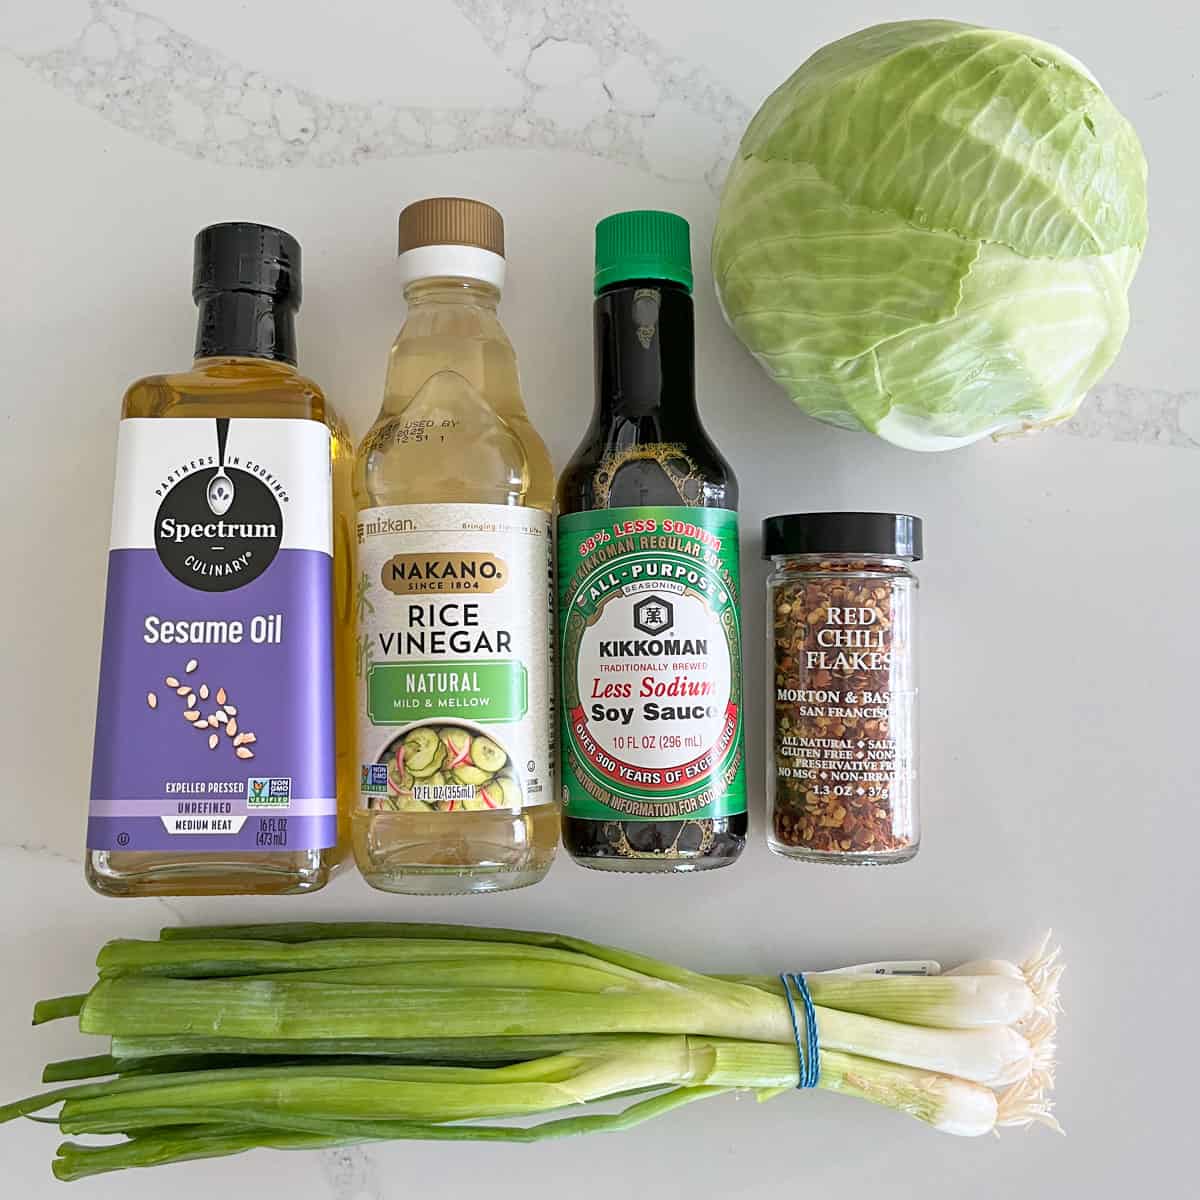 The ingredients needed to make an Asian cabbage salad.